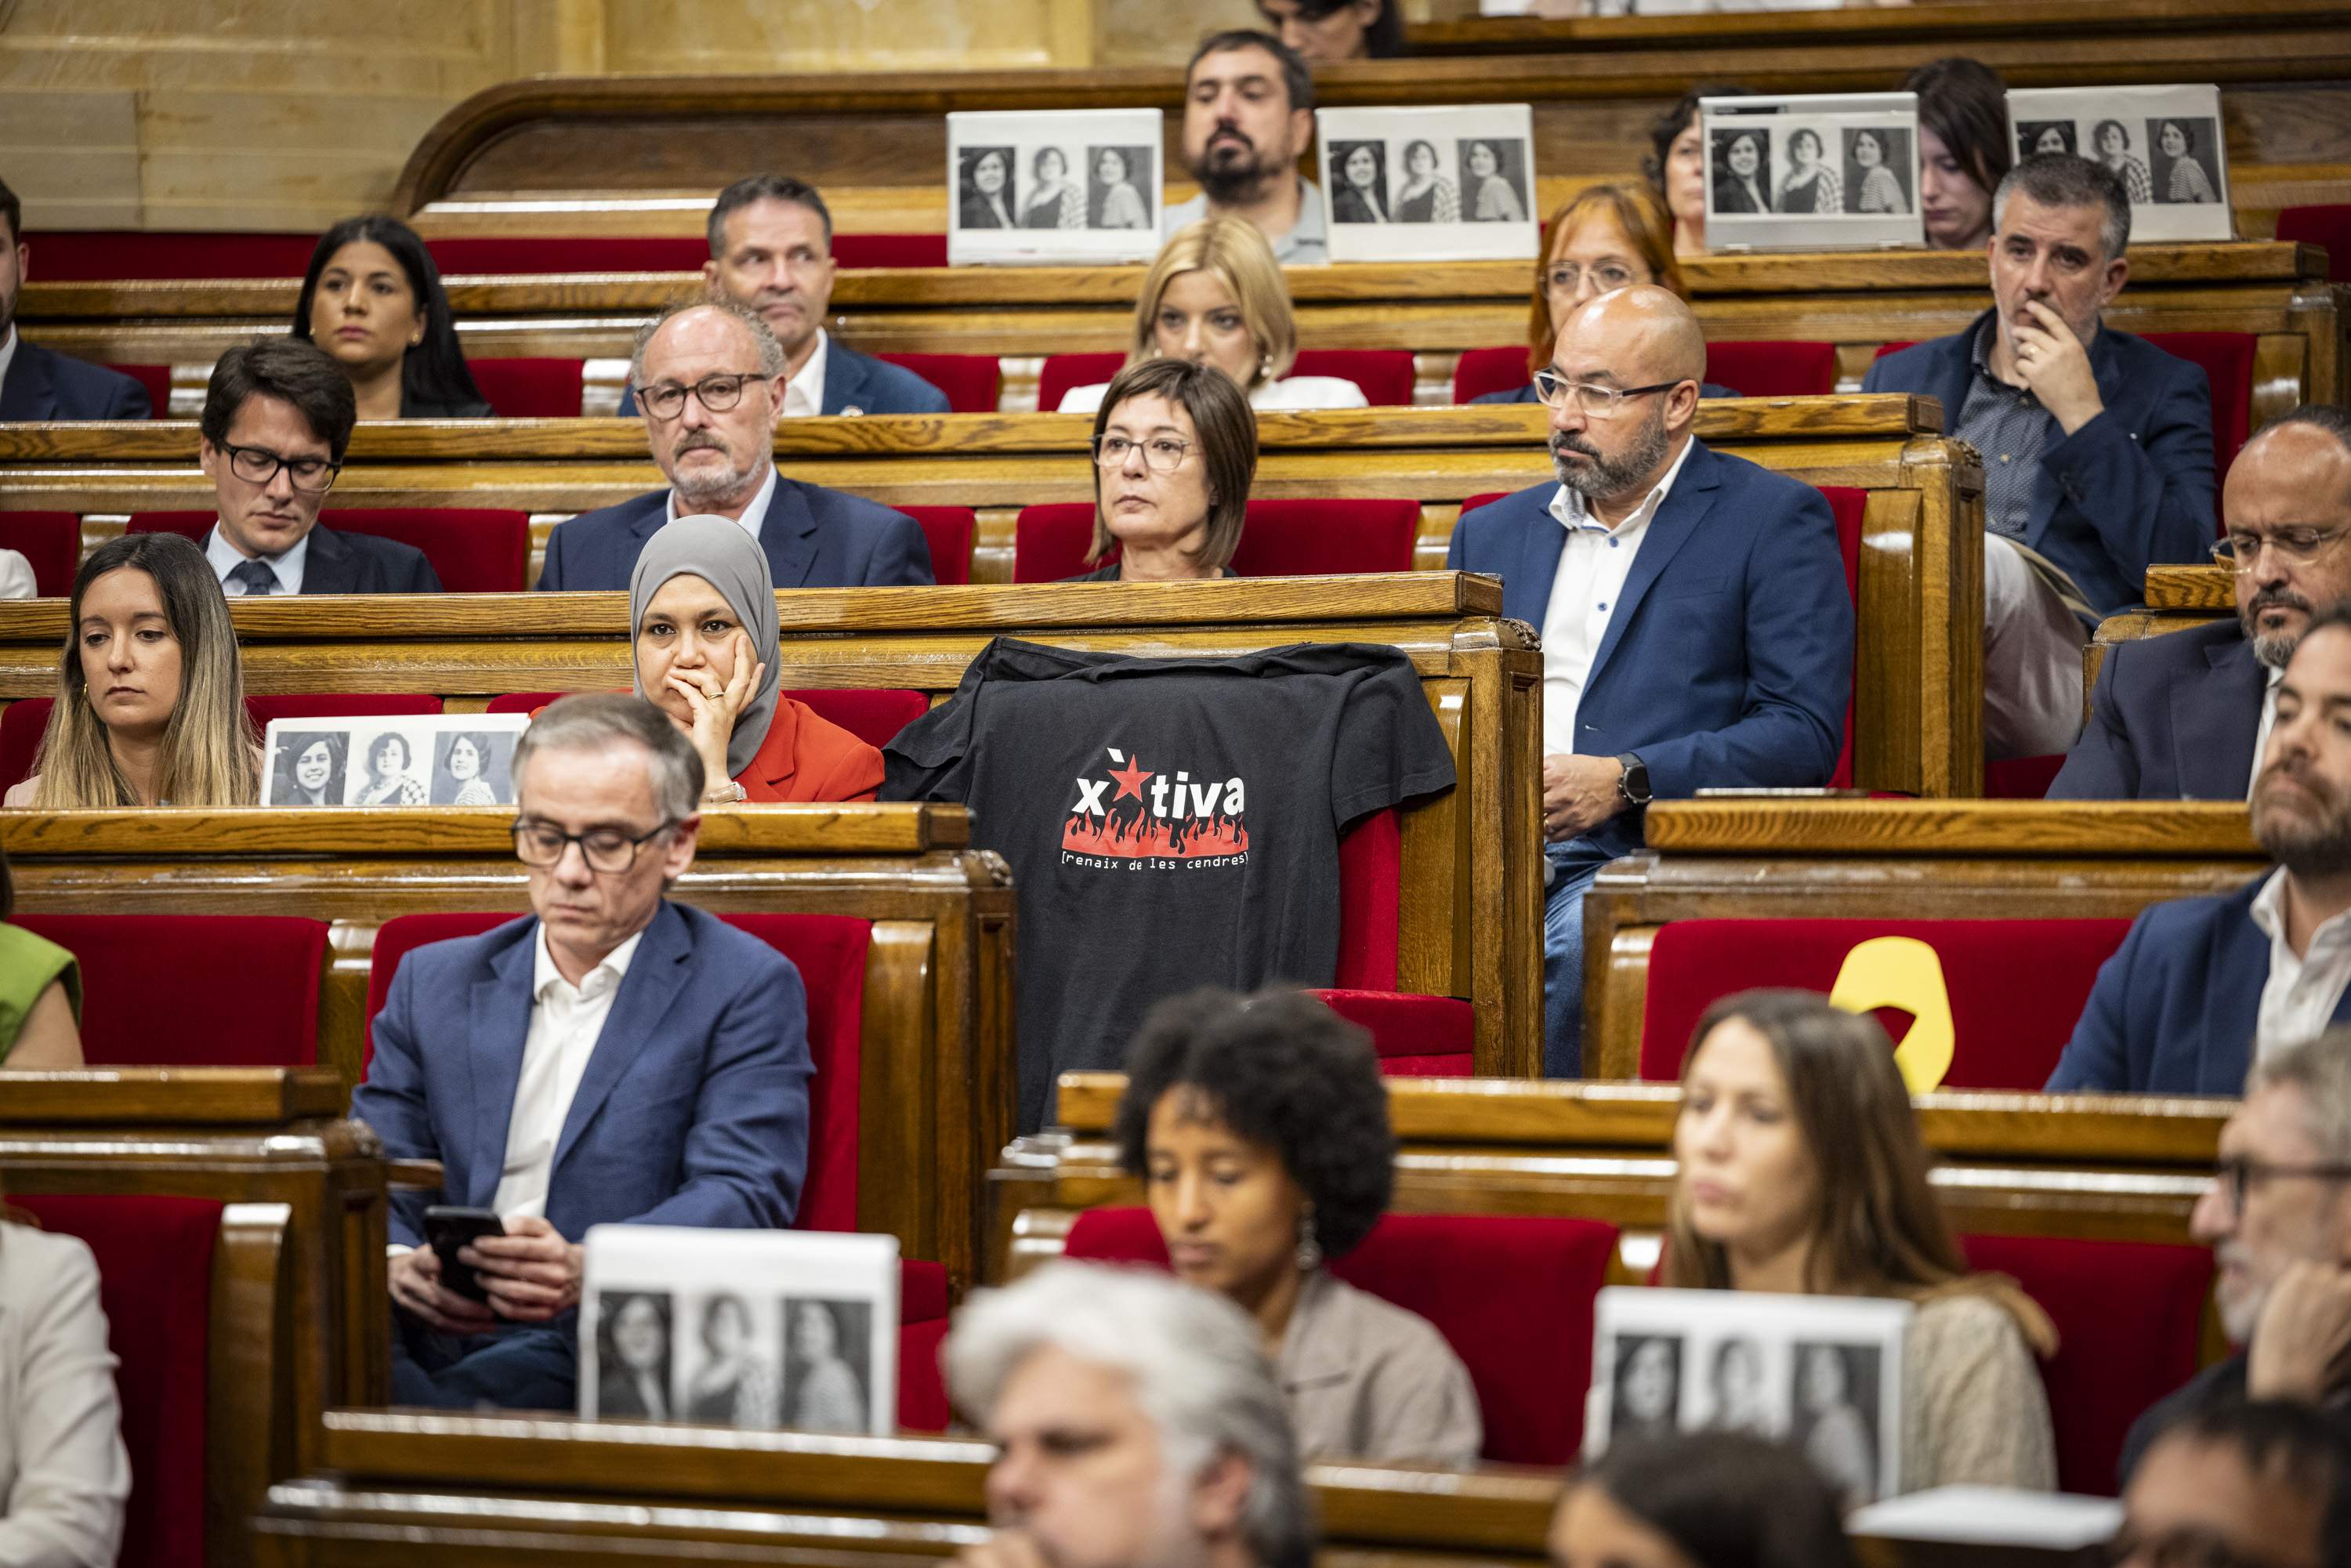 The story behind the t-shirt placed in Ruben Wagensberg's seat in the Catalan Parliament